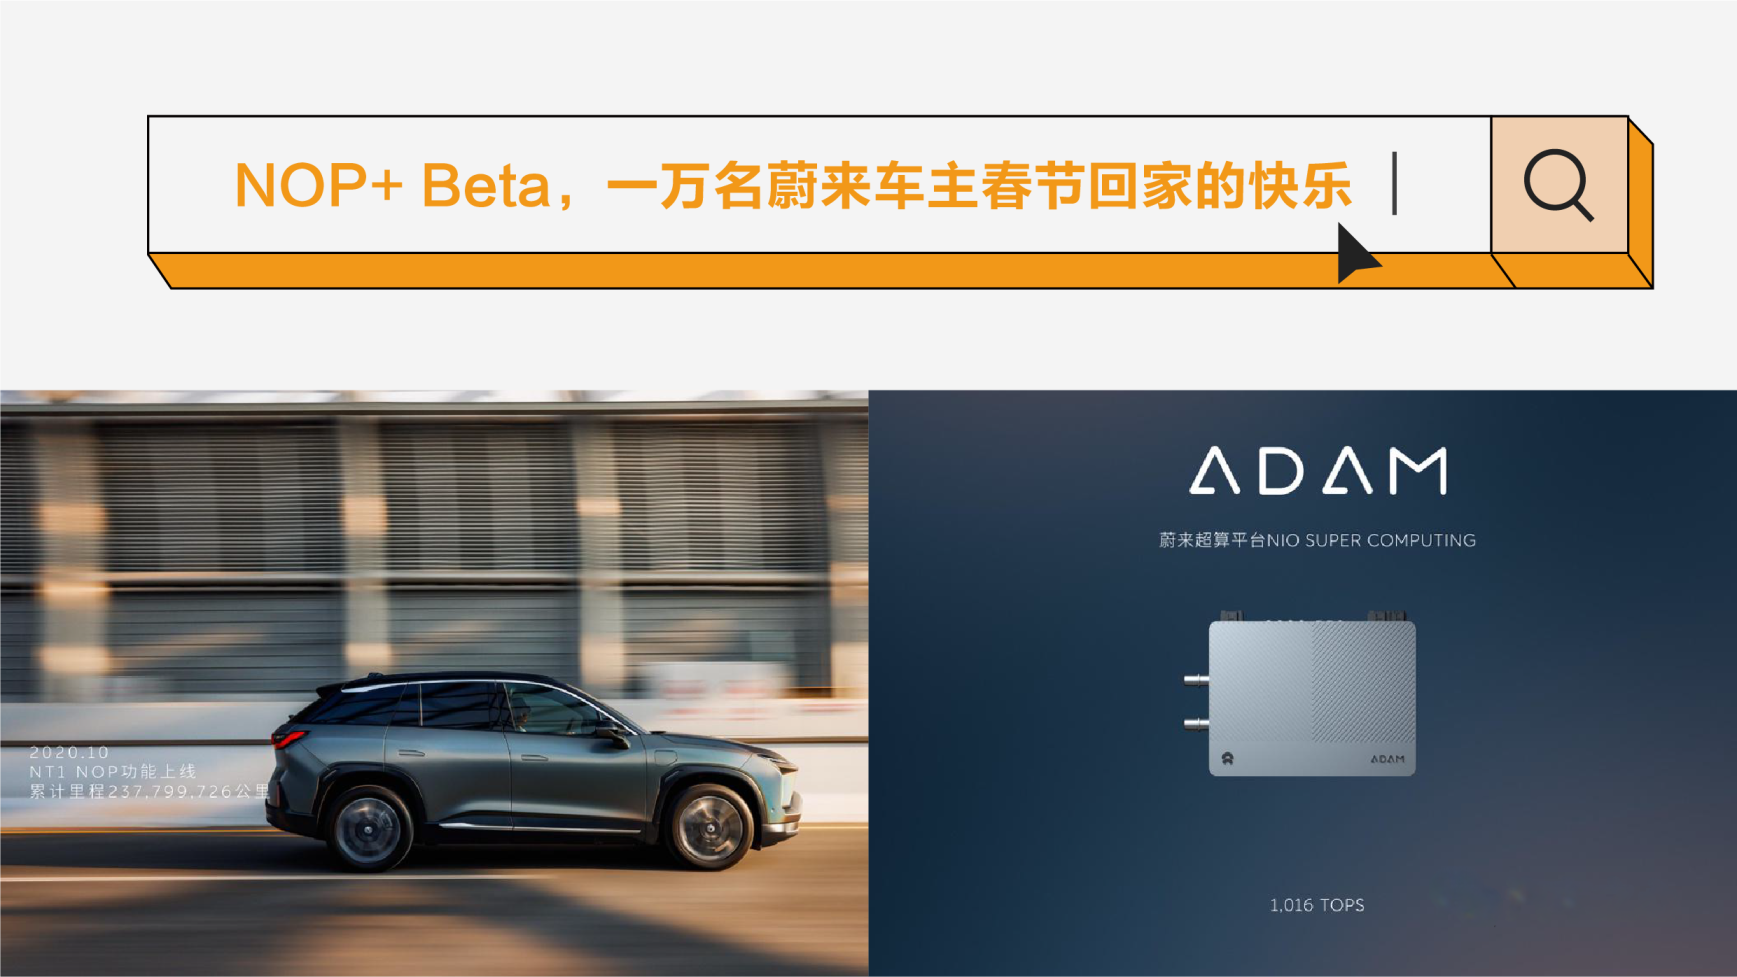 NOP+ Beta, the happiness of 10,000 NIO car owners returning home for the Spring Festival.